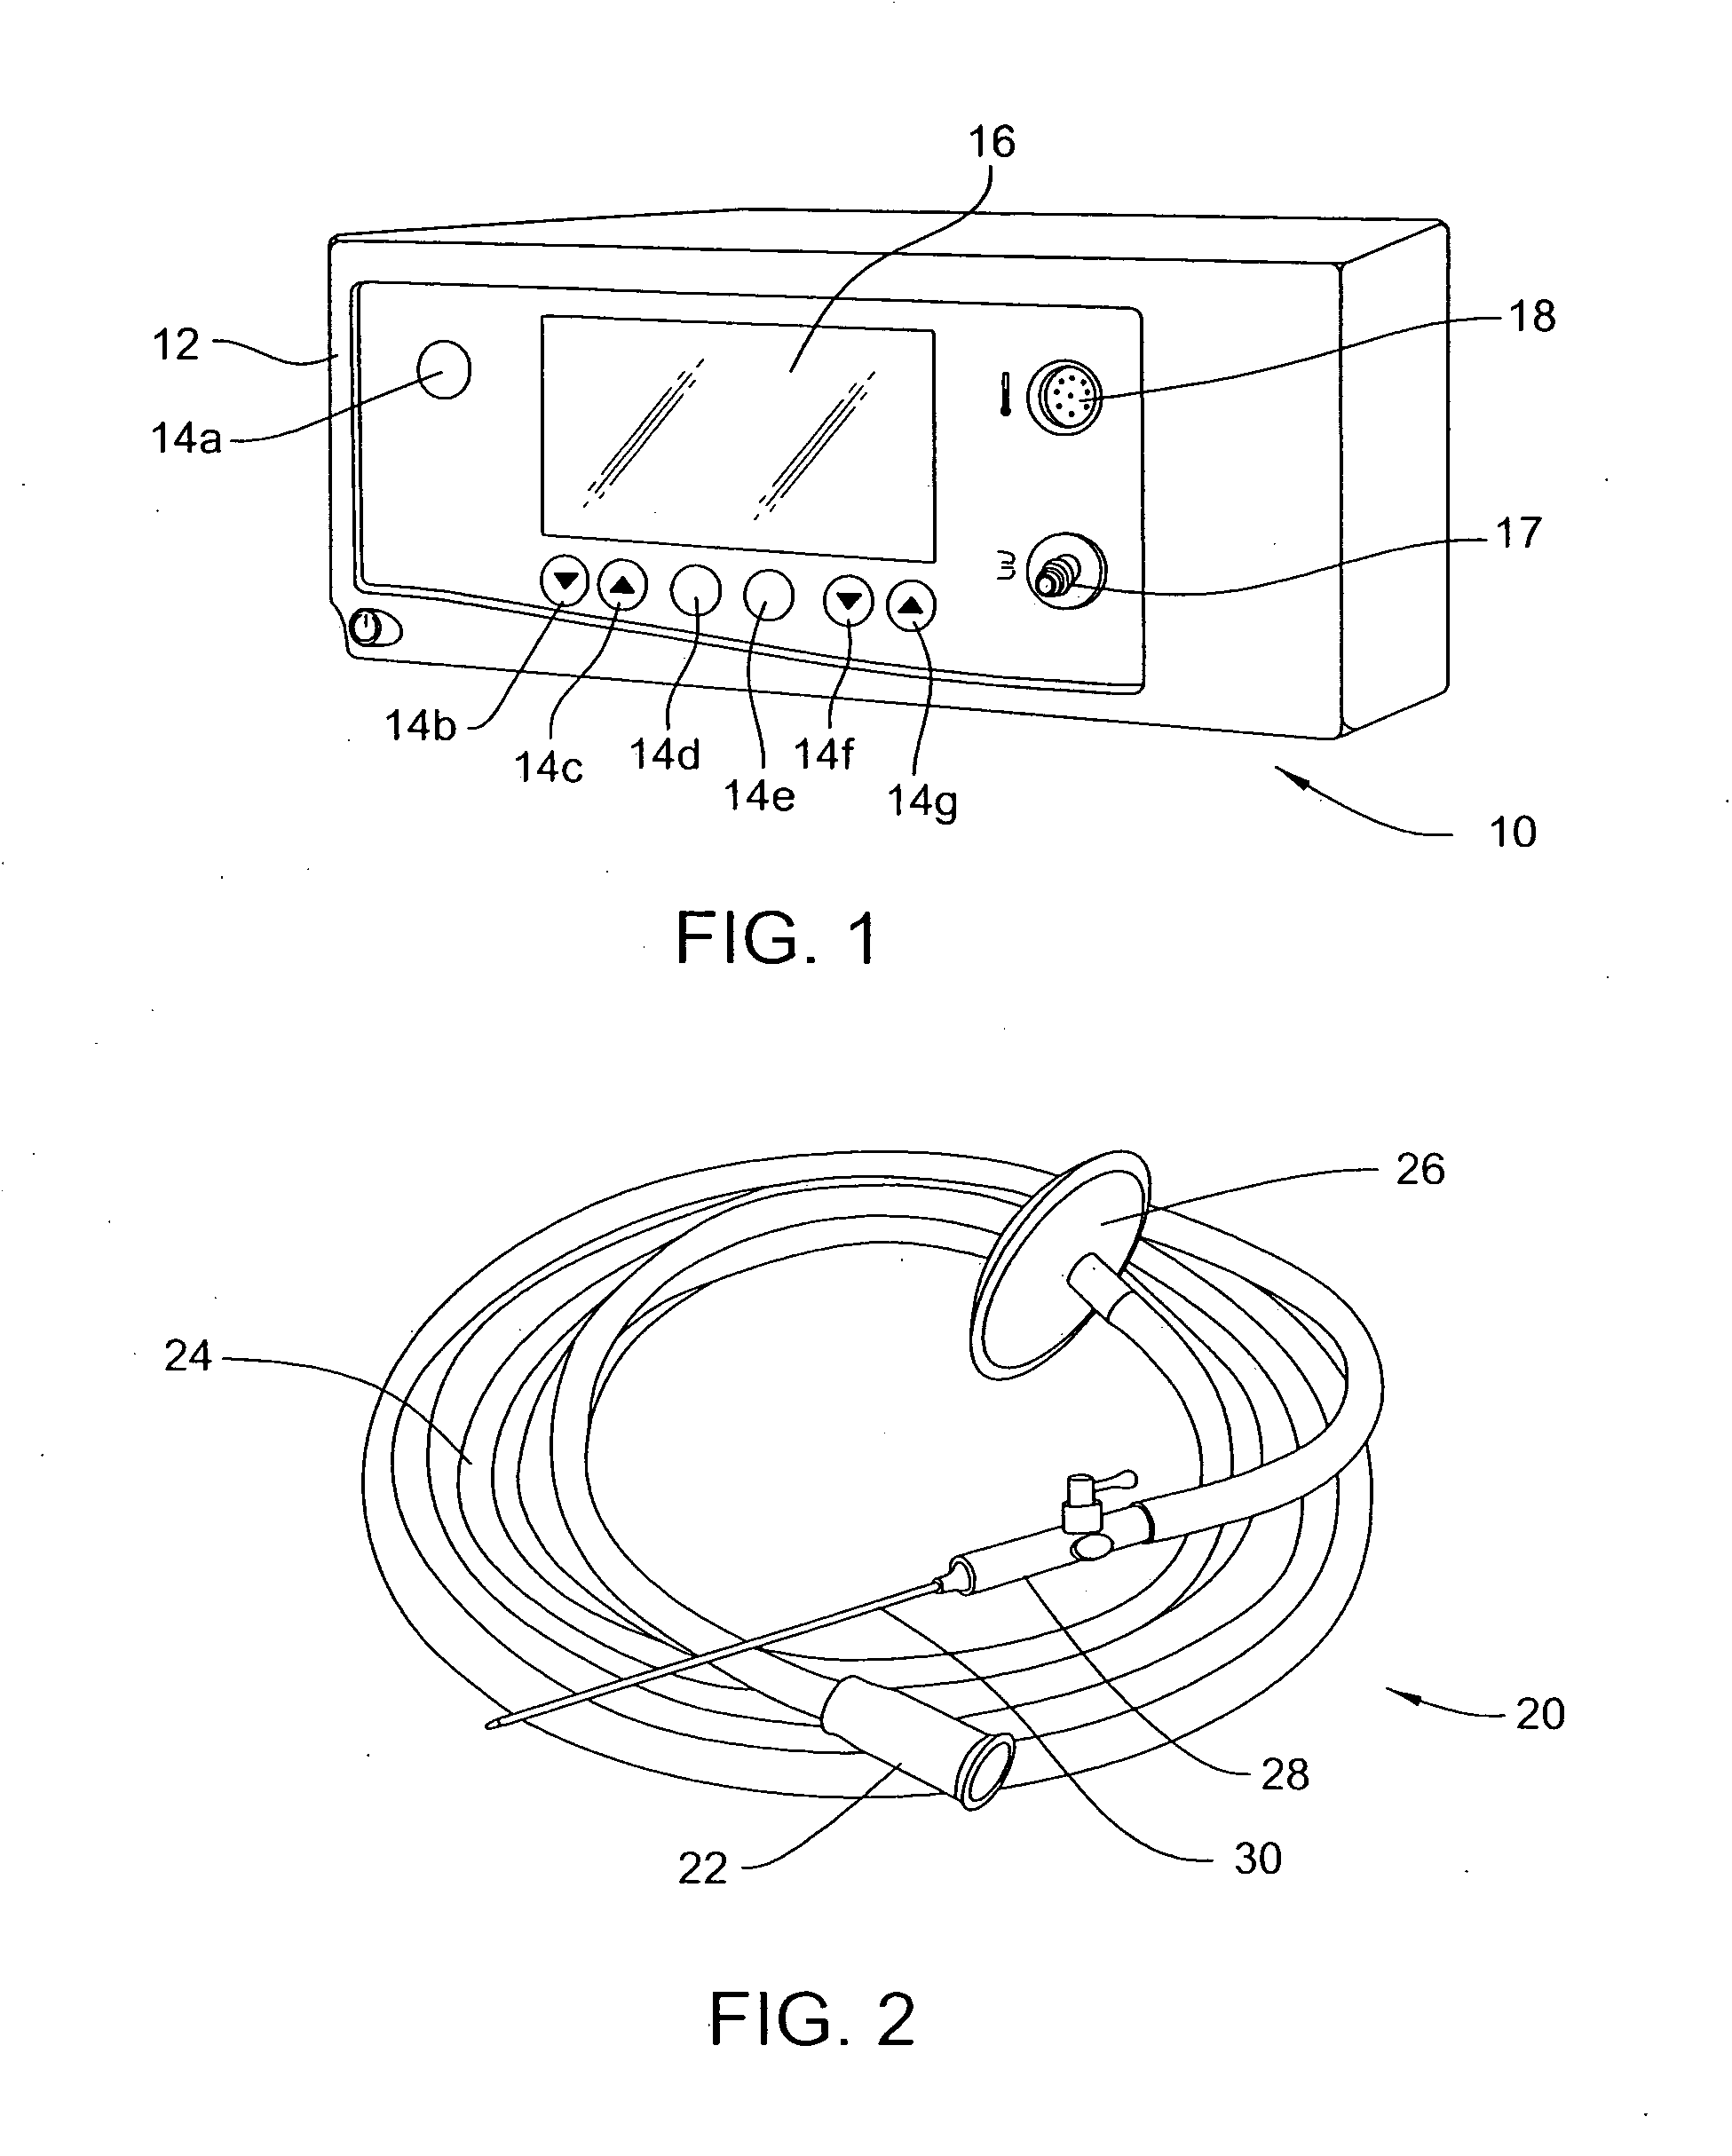 Method and apparatus for providing heat to insufflation gases